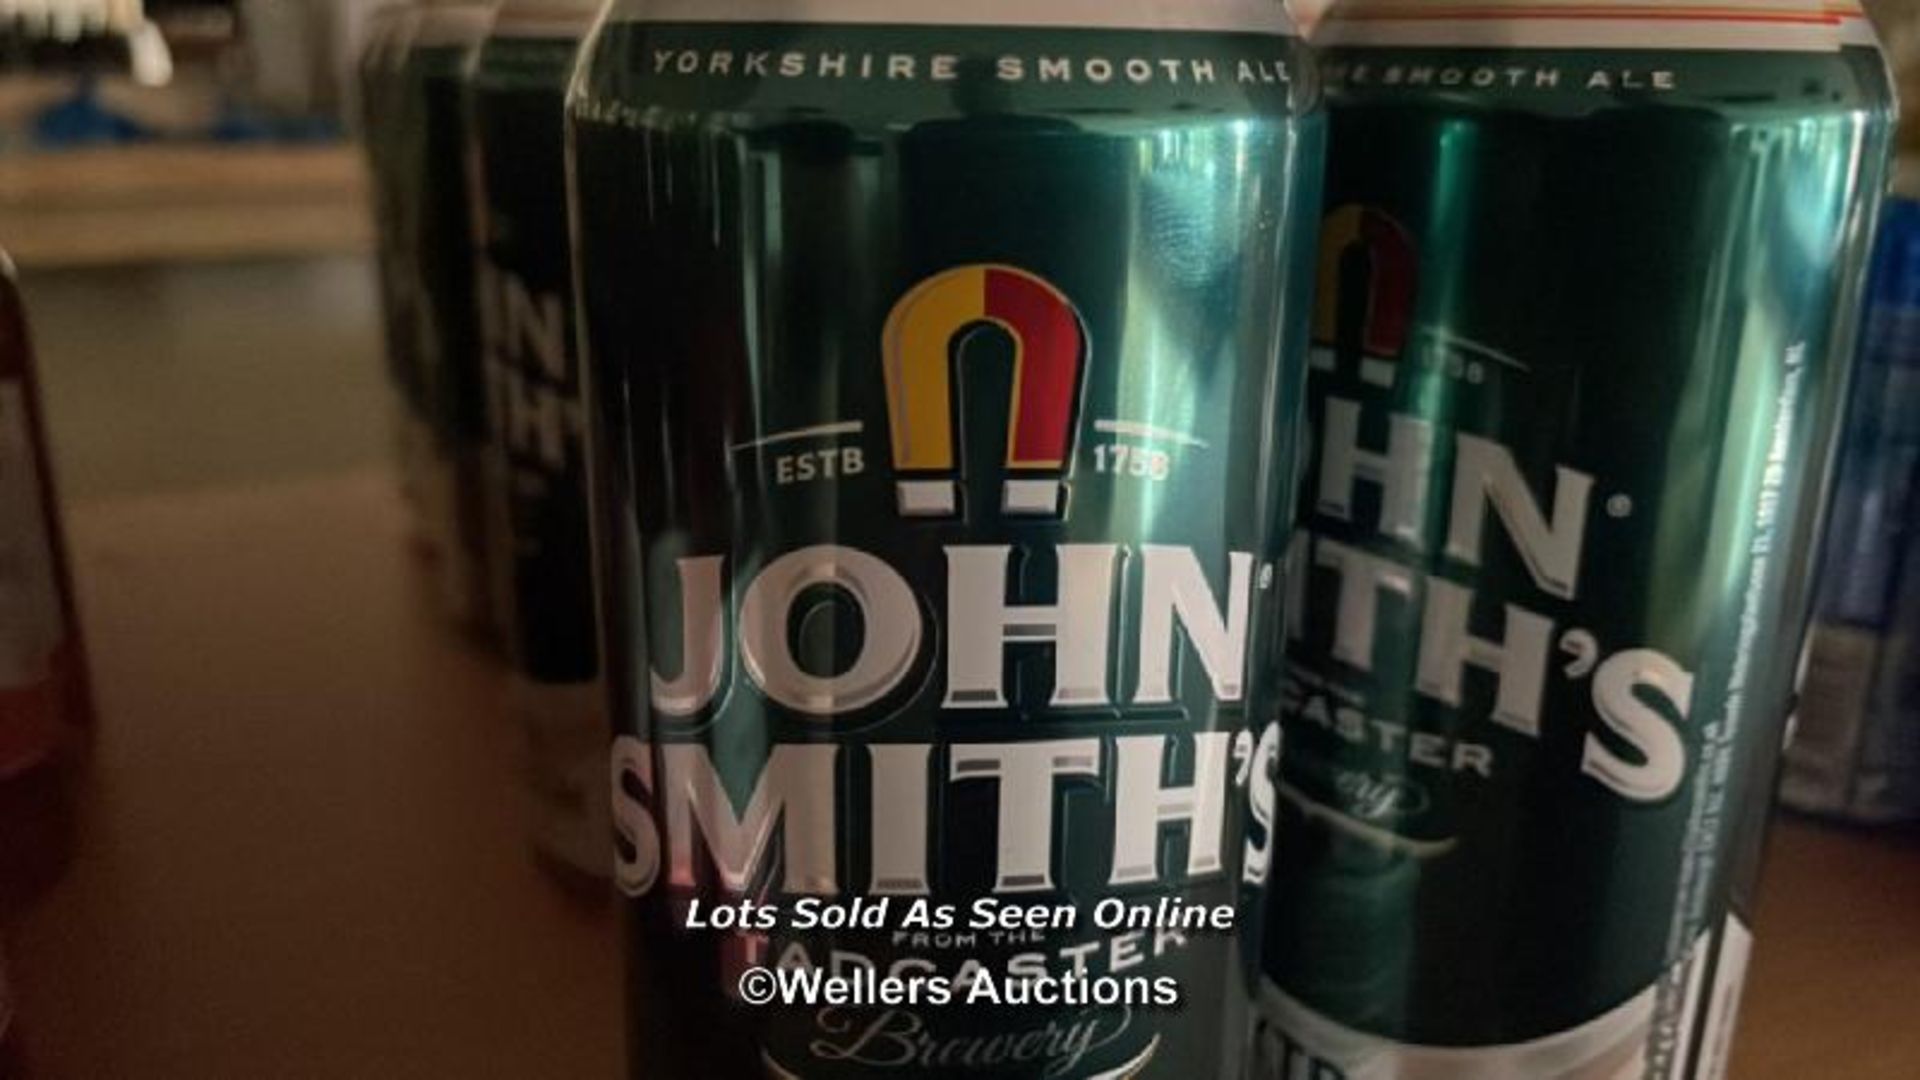 15X CANS OF JOHNS SMITHS, 440ML, 3.6% VOL / COLLECTION LOCATION: OLD WOKING DISTRICT RECREATION - Image 2 of 2